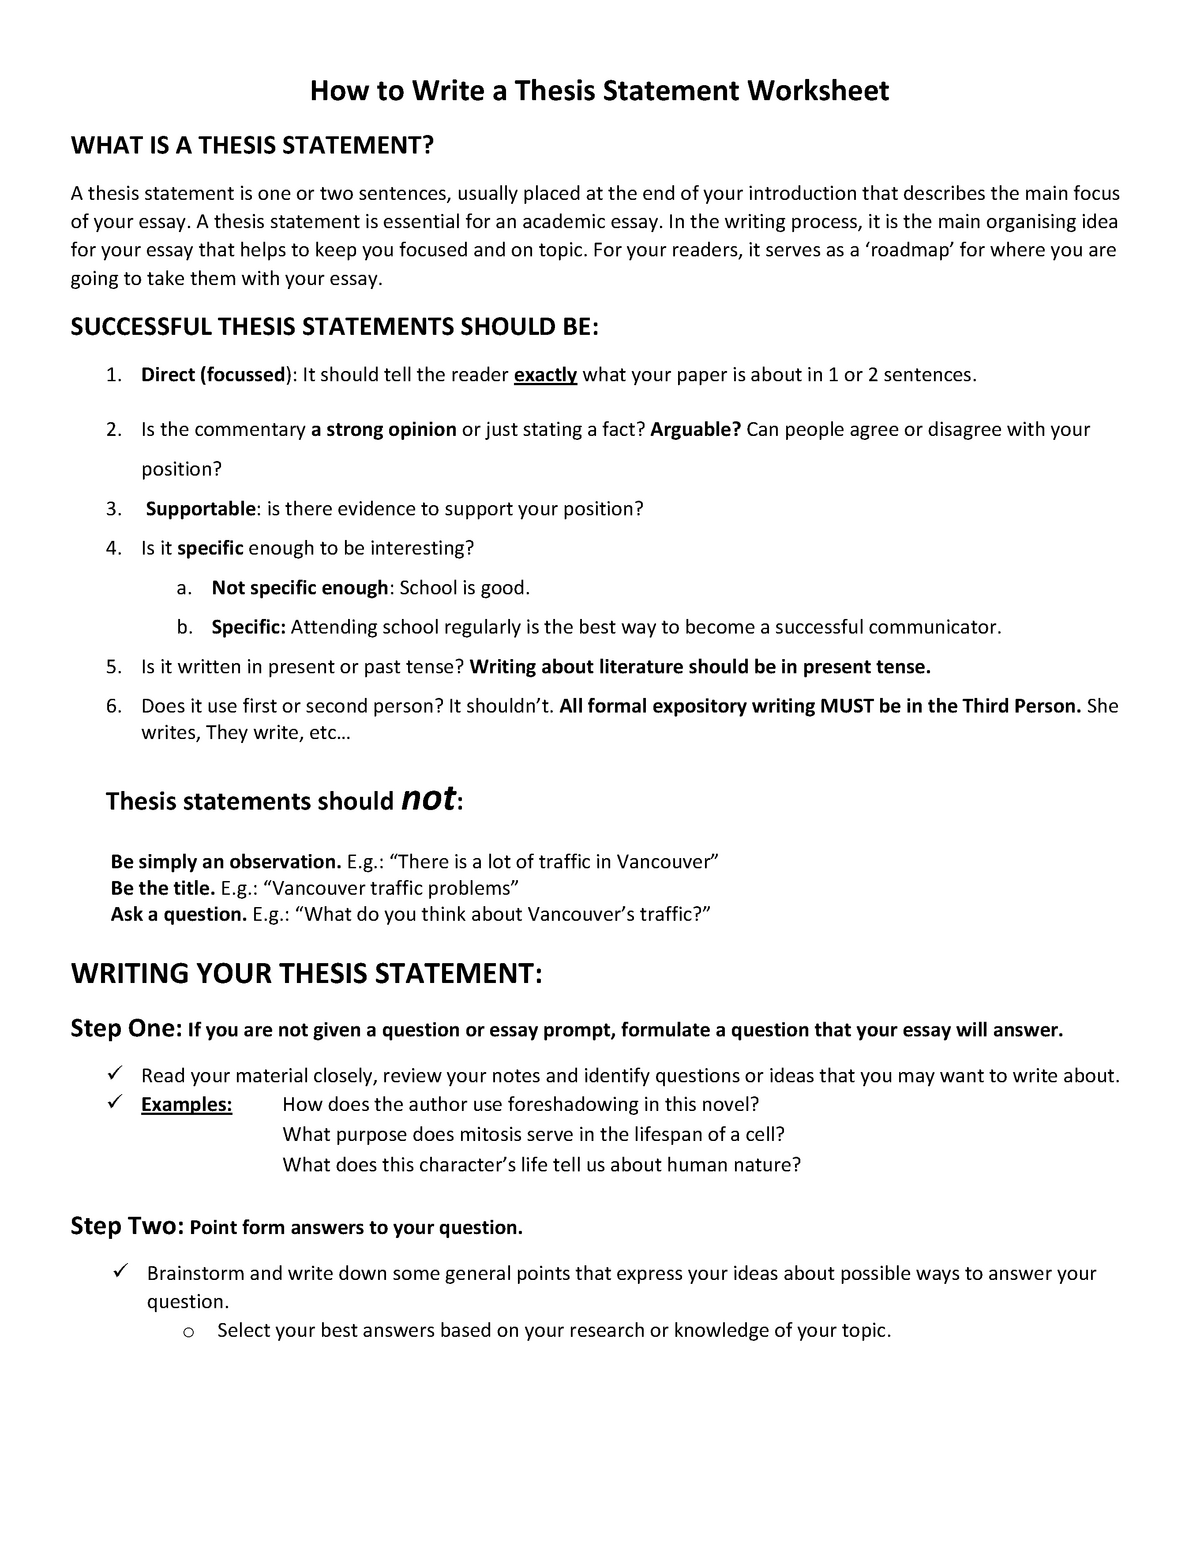 what is a thesis statement worksheet